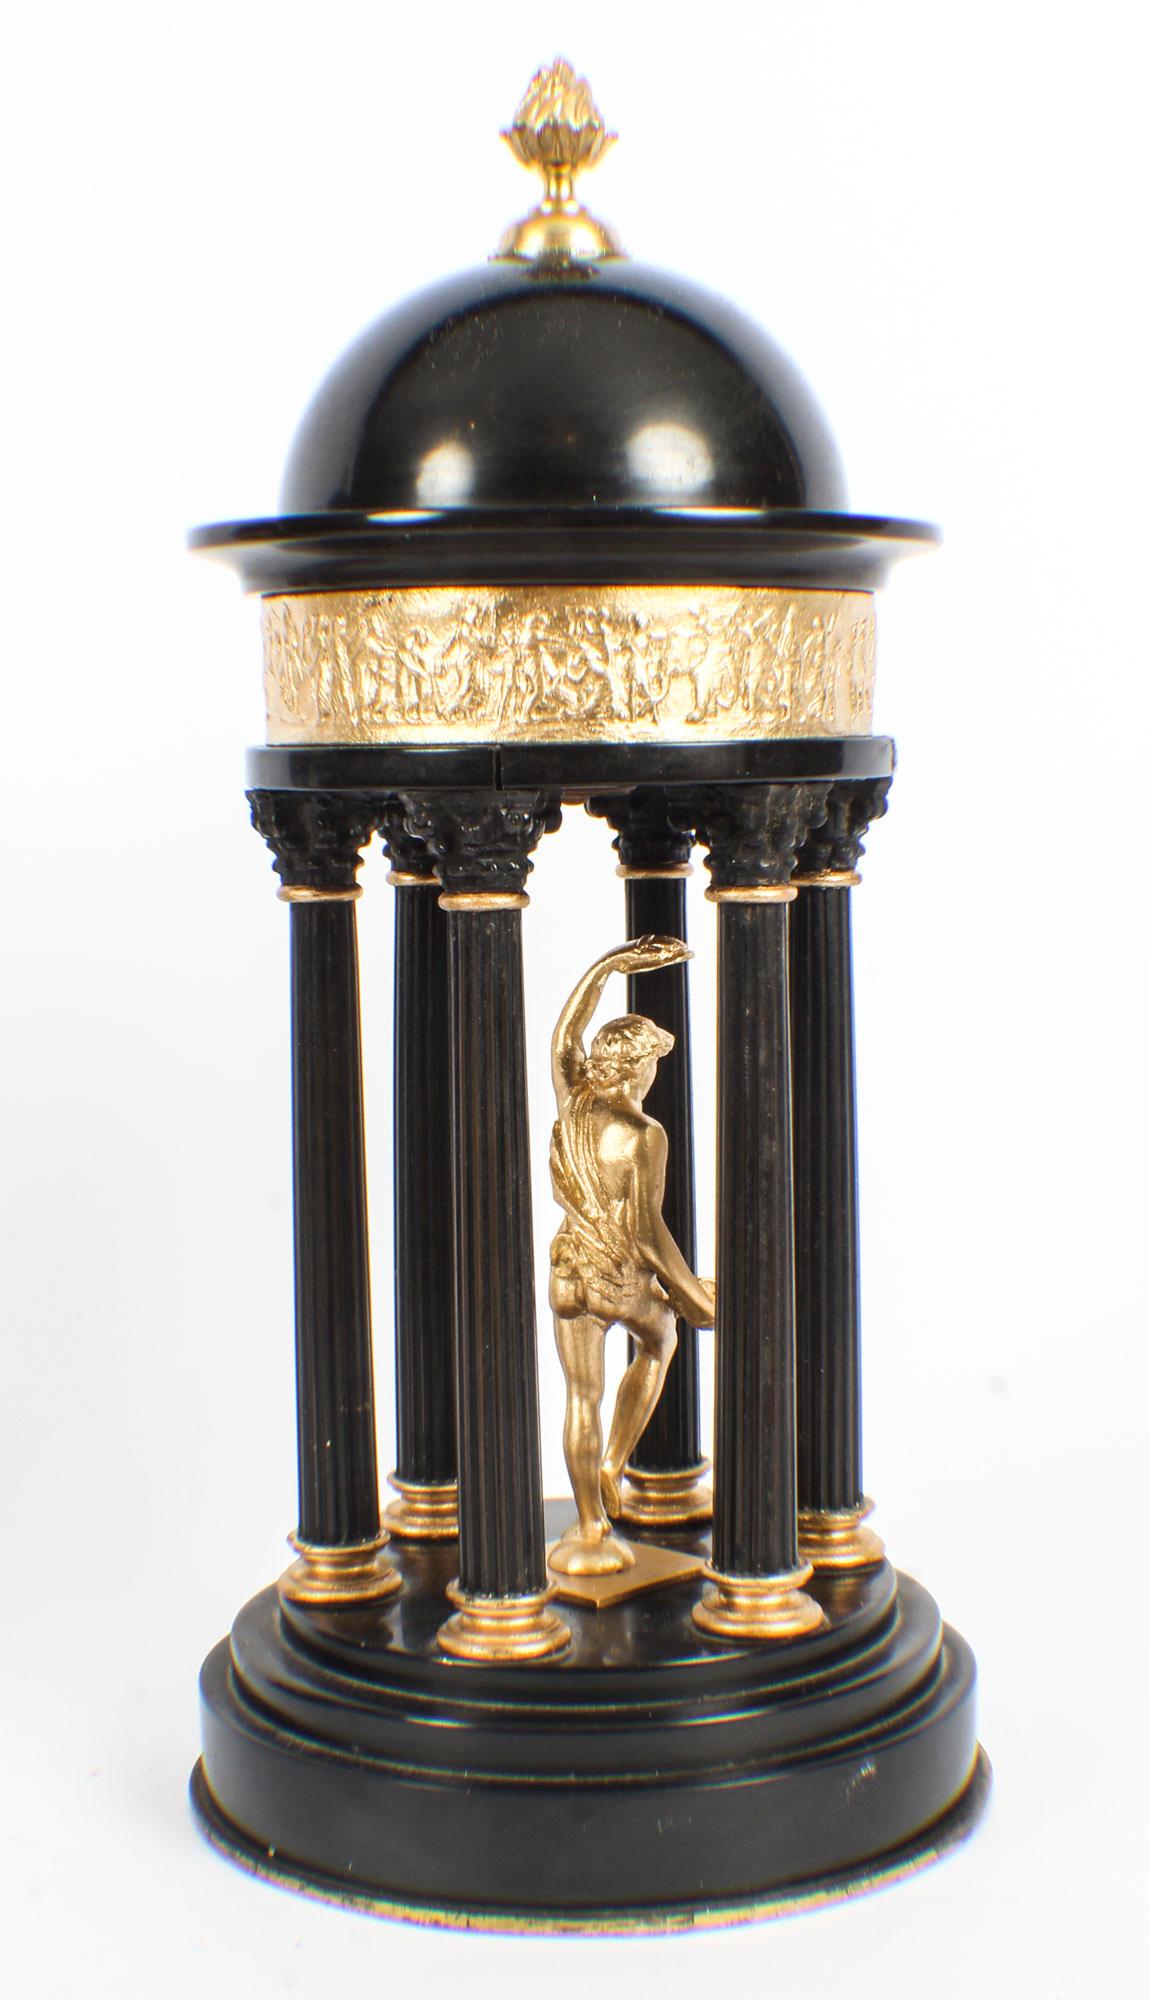 This is a truly stunning antique pair of Italian Grand Tour black marble and slate ormolu mounted colonnade temple models, dating from the mid-19th century.
 
This pair of colonnades feature domed topped roofs surmounted by ormolu flaming finials